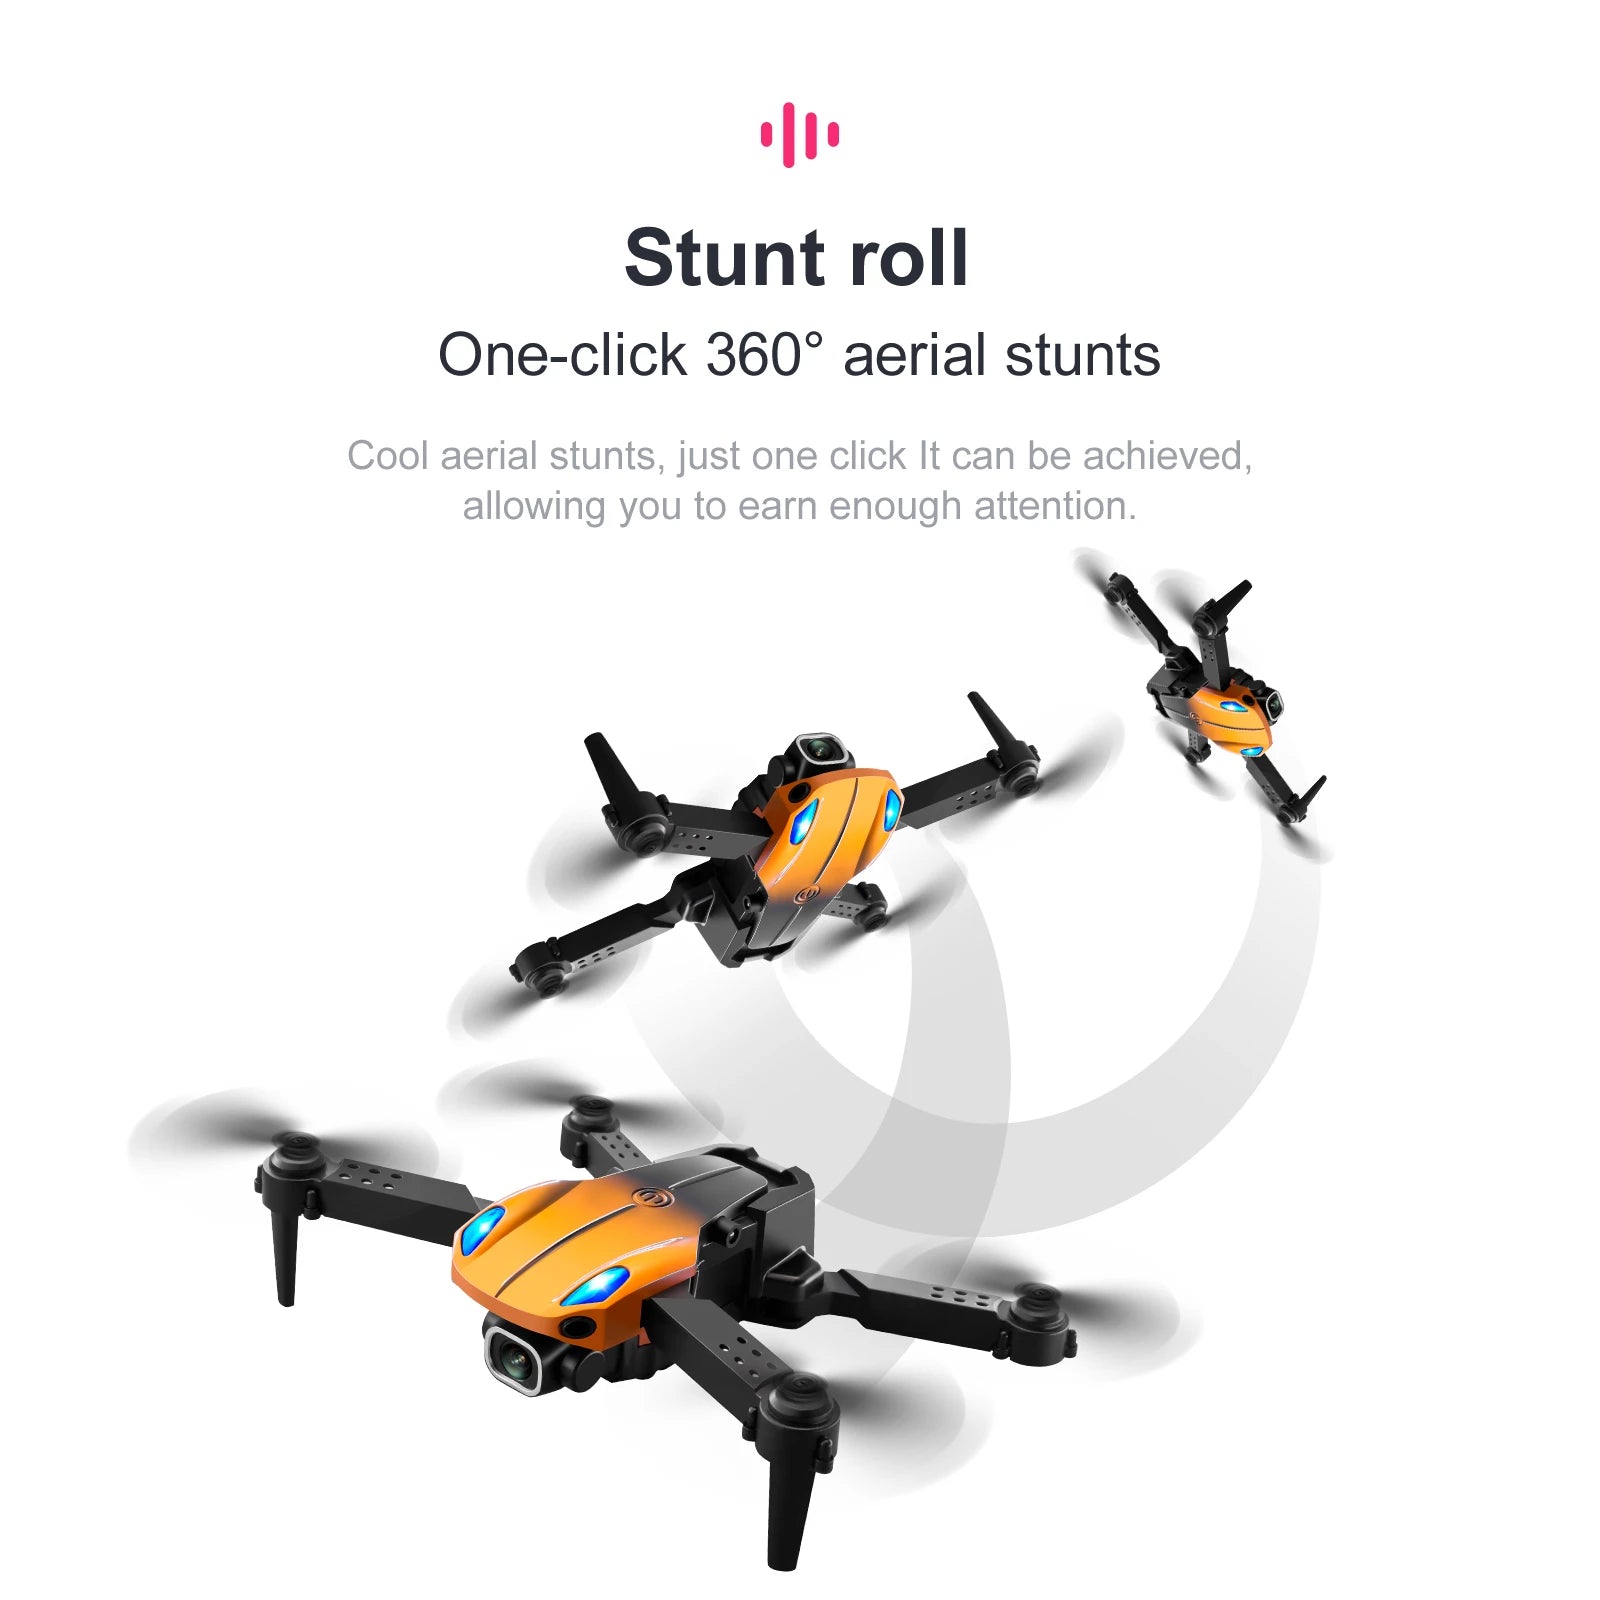 stunt roll one-click 3609 aerial stunts, just one click